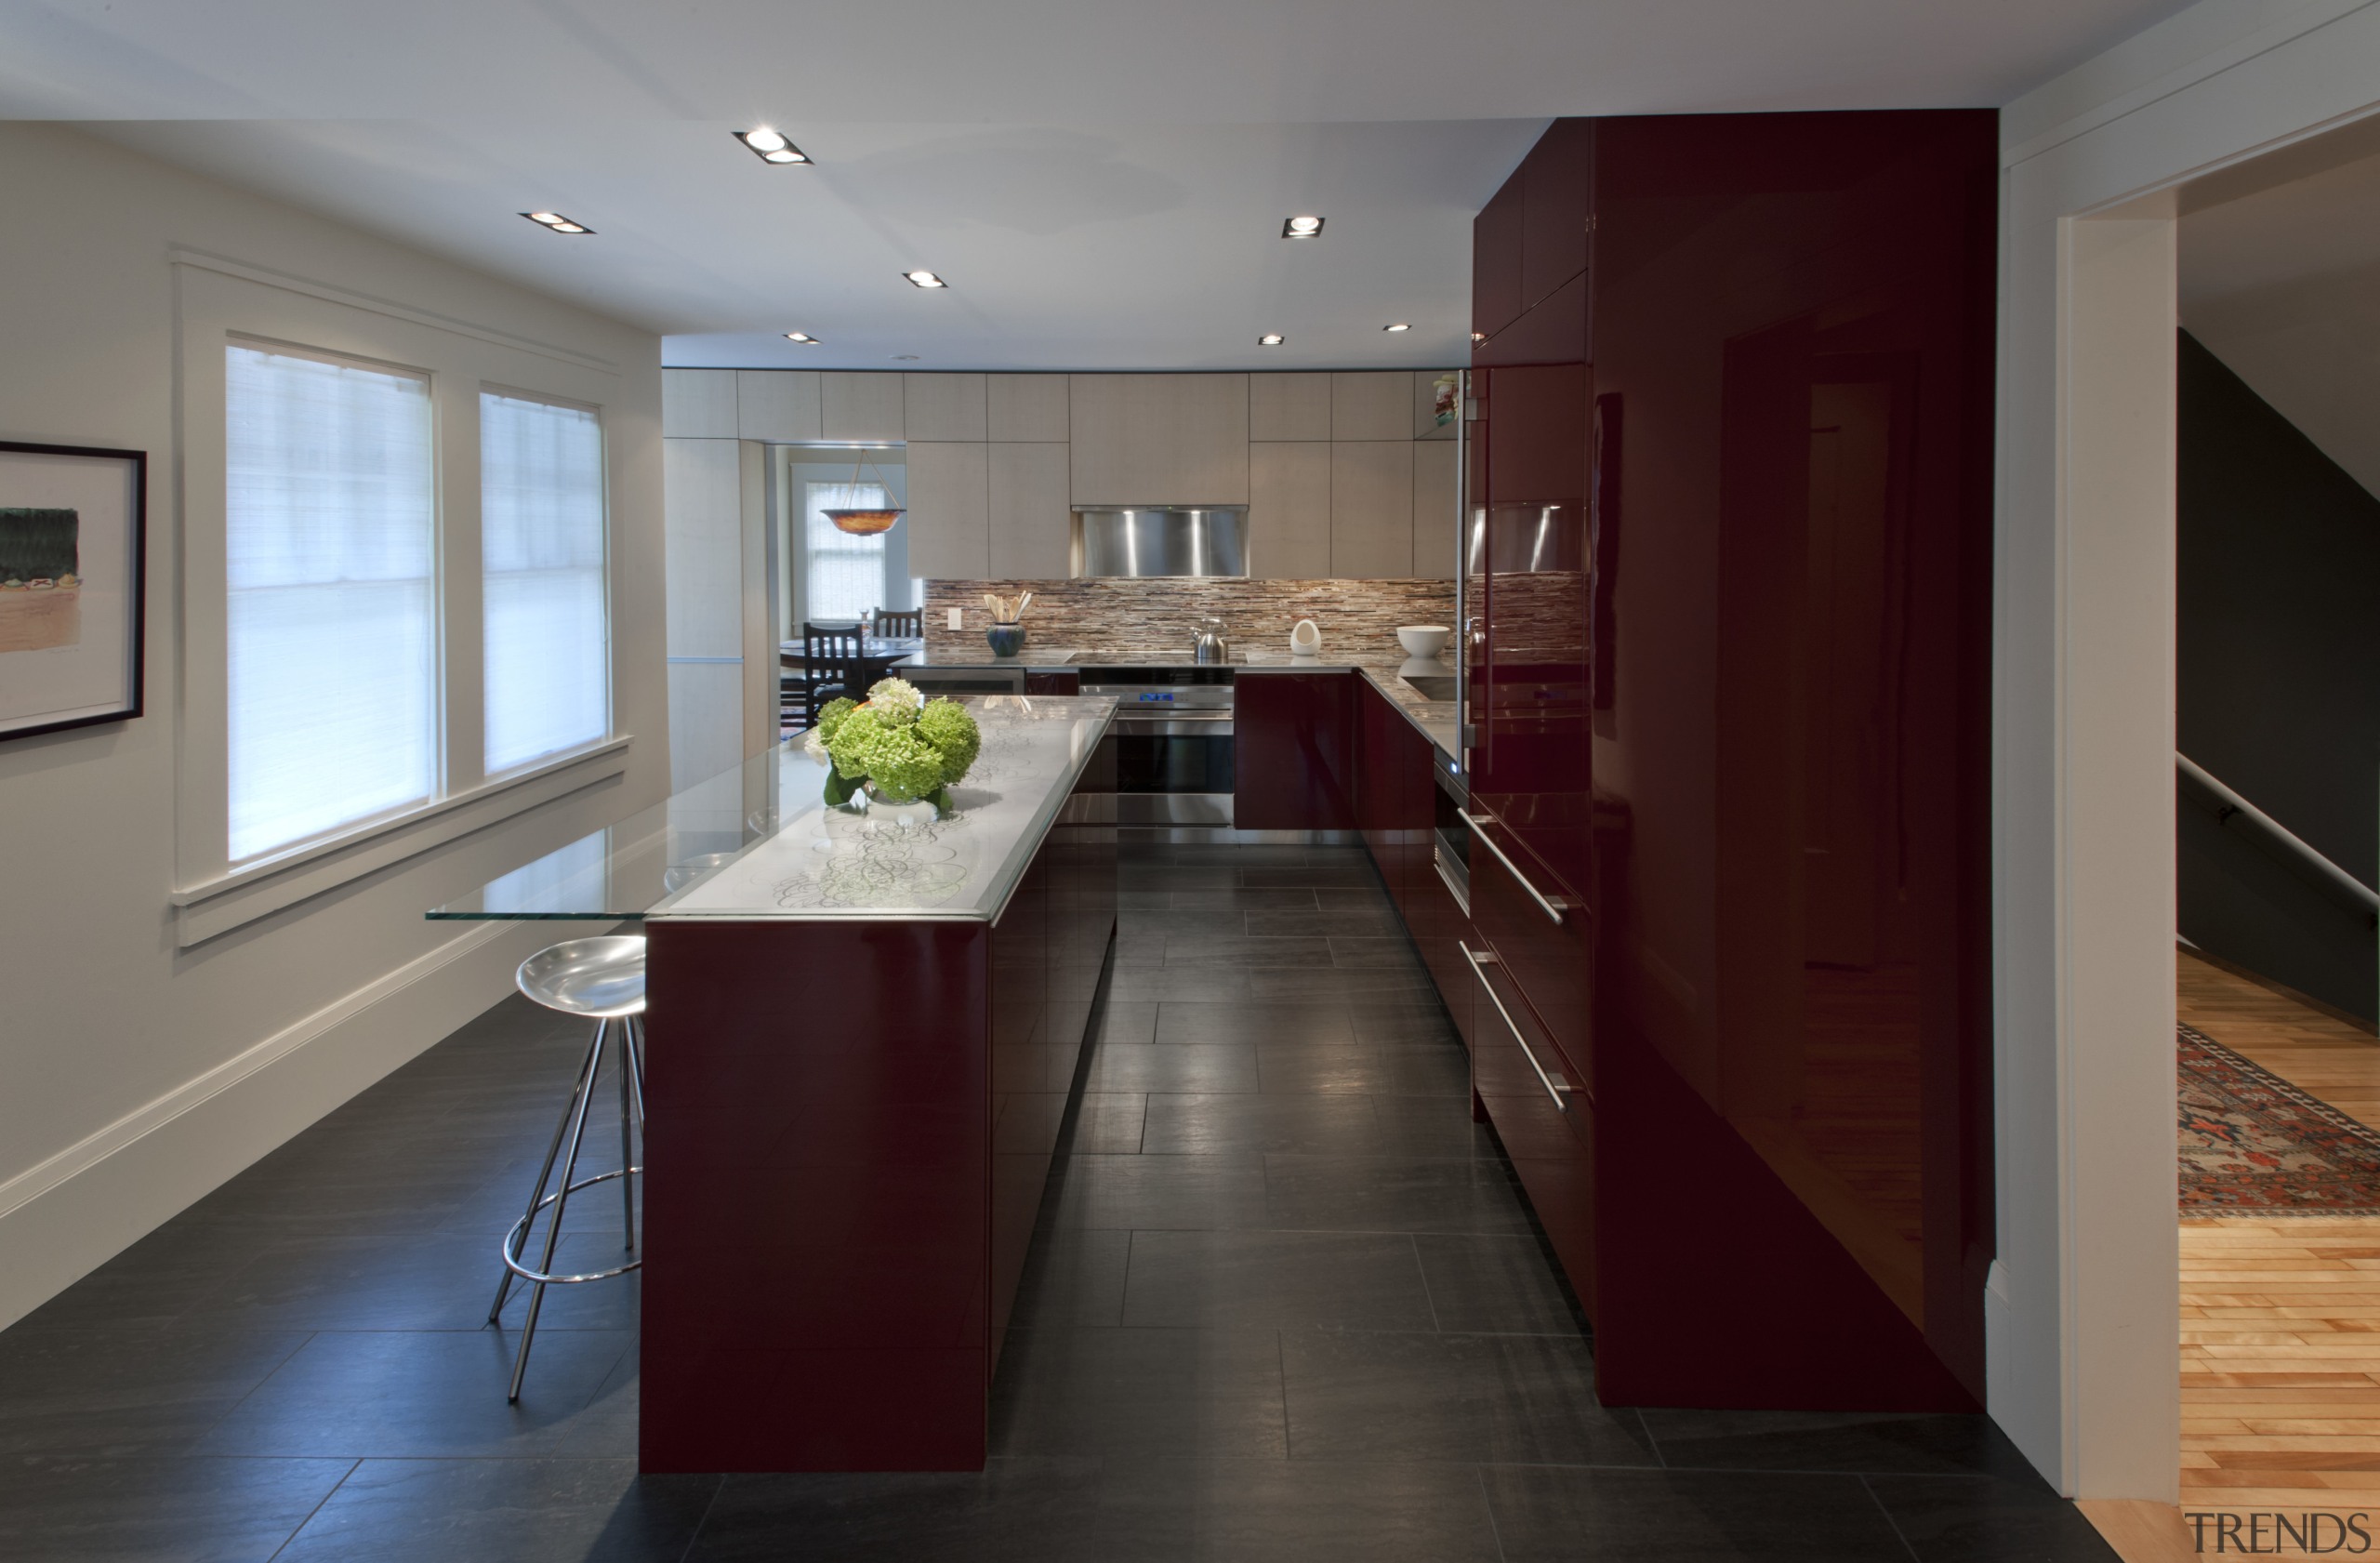 Contemporary kitchen with red cabinetry - Contemporary kitchen architecture, cabinetry, ceiling, countertop, cuisine classique, floor, flooring, hardwood, house, interior design, kitchen, laminate flooring, real estate, room, wood flooring, gray